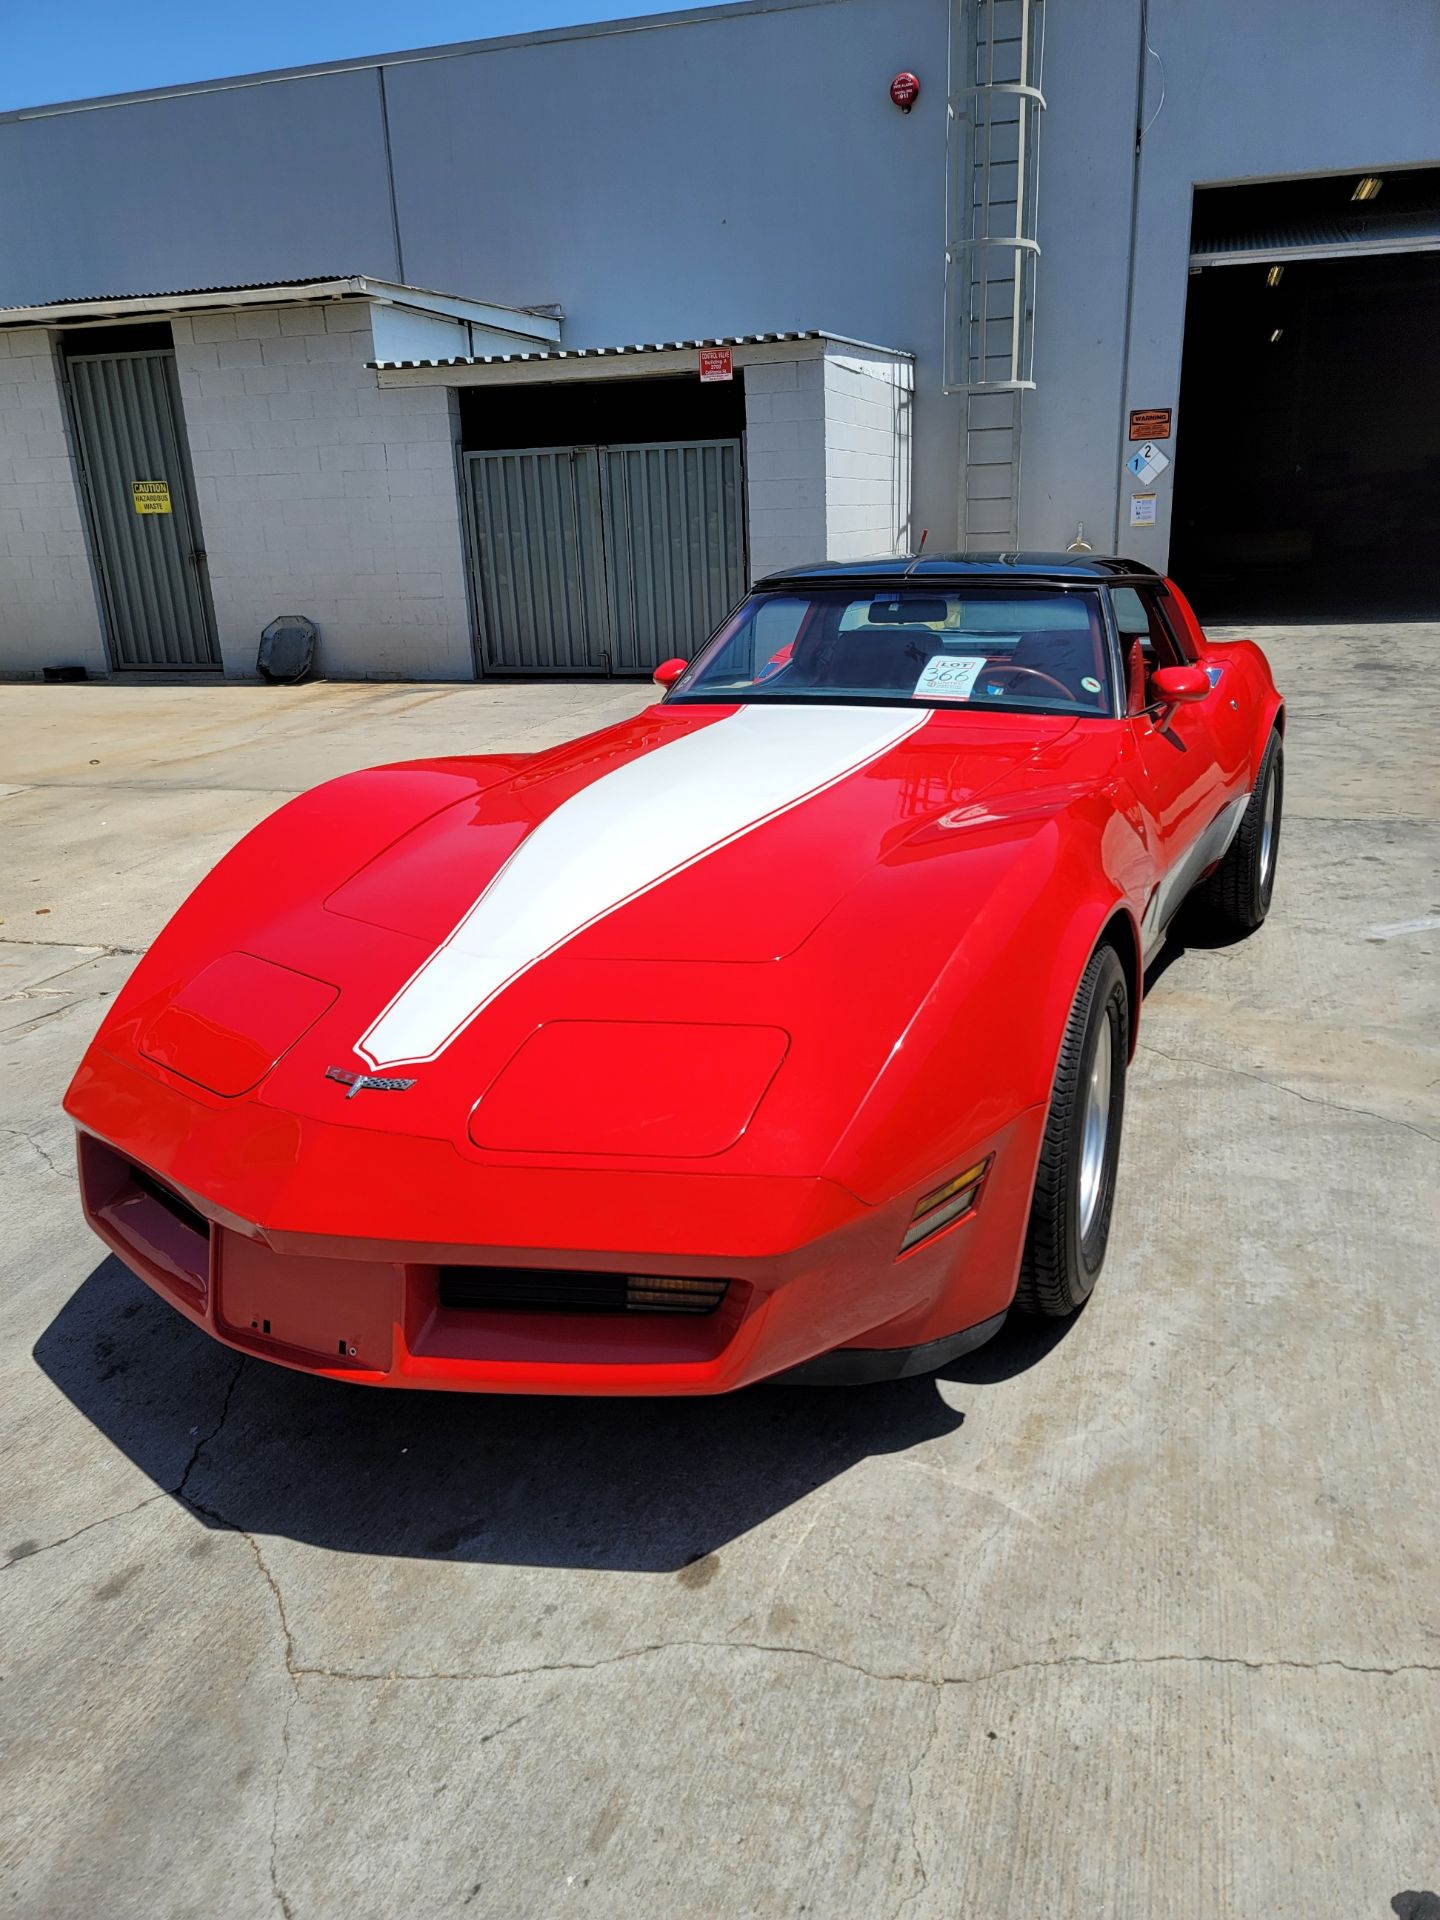 1980 CHEVROLET CORVETTE, WAS VIC EDELBROCK'S PERSONAL CAR BOUGHT FOR R&D, RED INTERIOR, TITLE ONLY. - Image 59 of 70